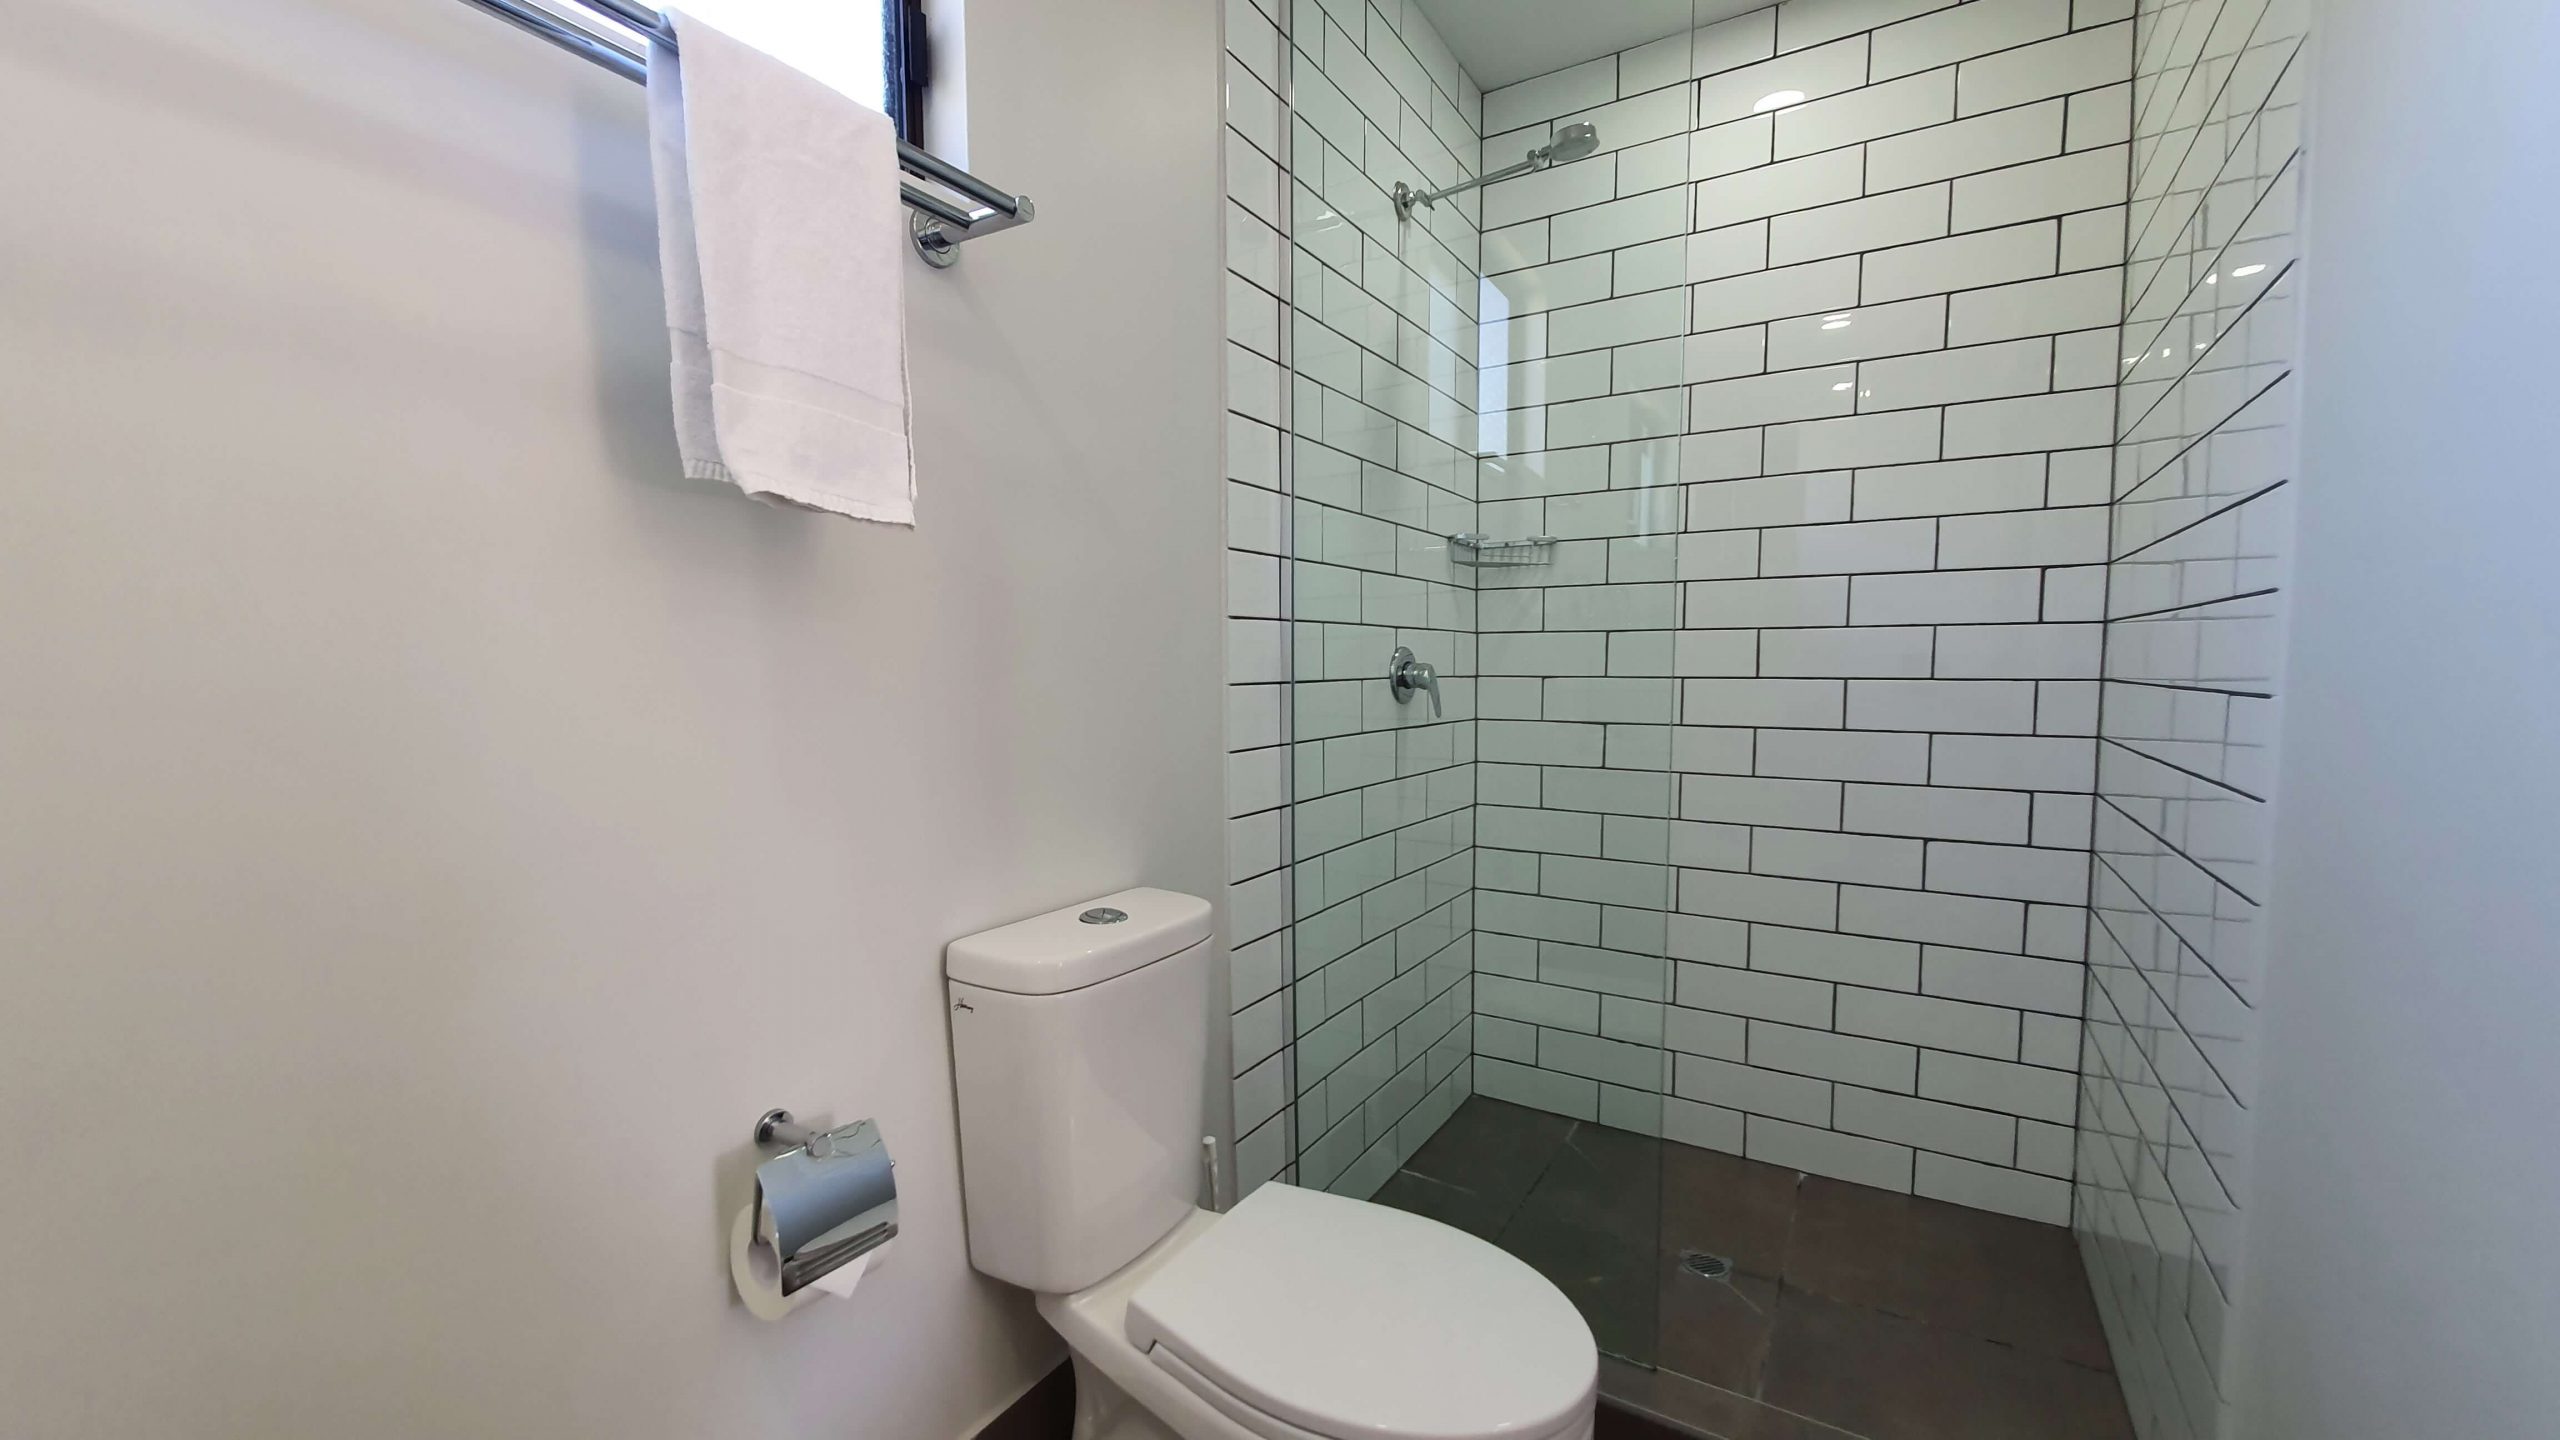 Shower and toilet in Bathroom of Superior Double Cabin at Alex Beach Cabins